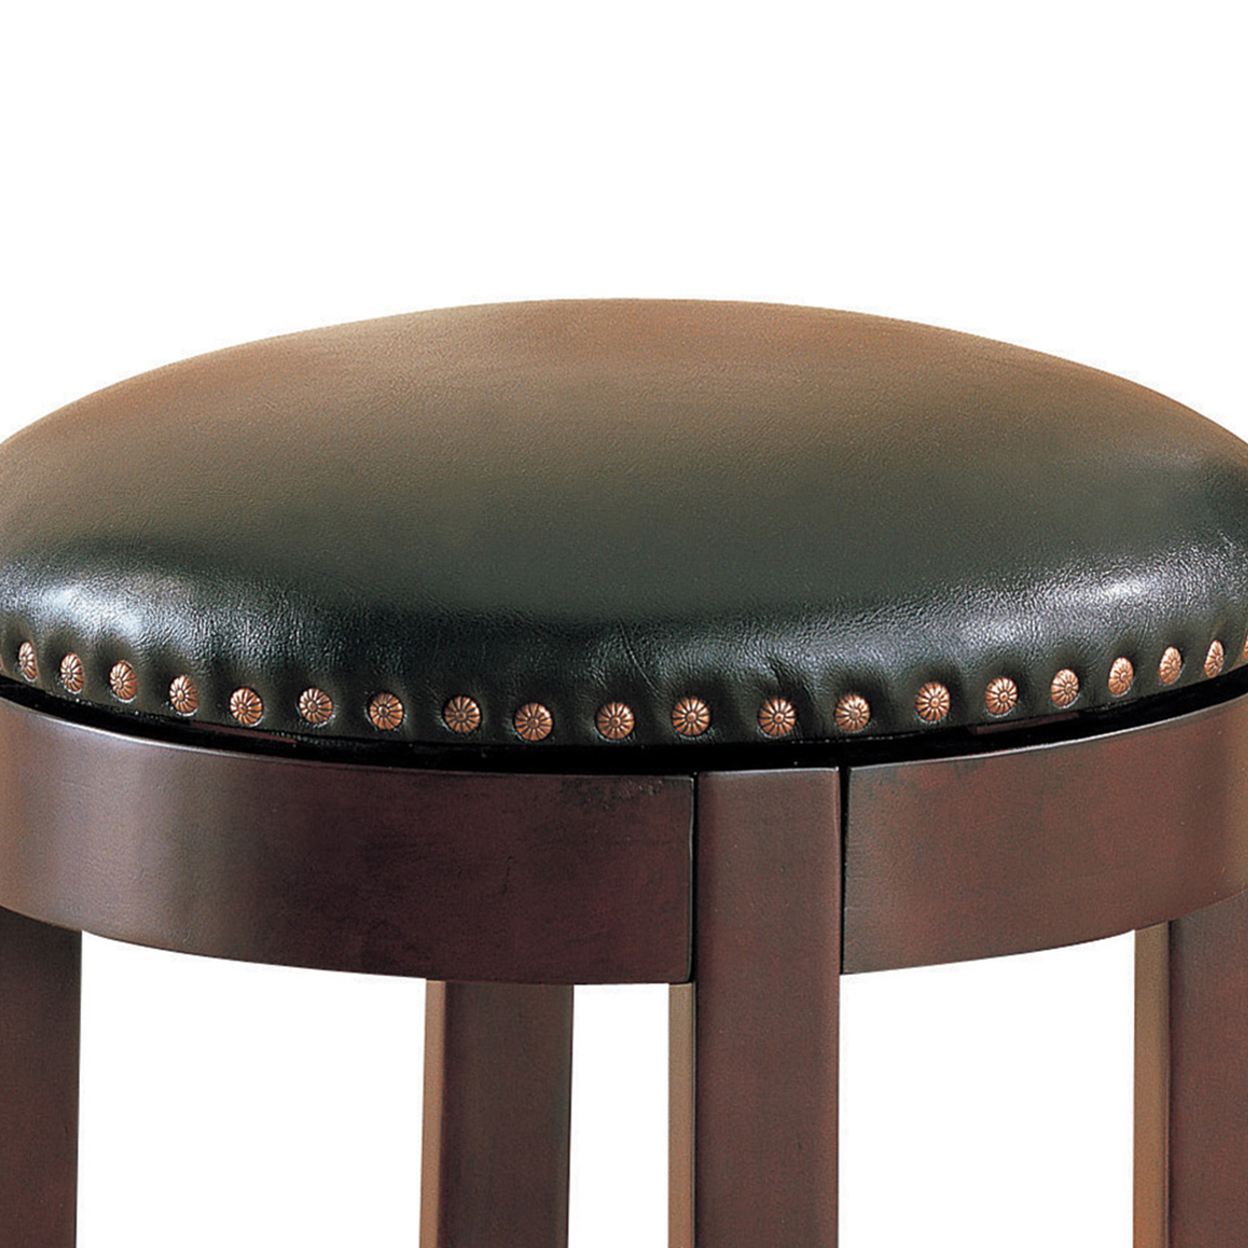 Round Wooden Counter Height Stool With Upholstered Seat, Brown, Set Of 2- Saltoro Sherpi